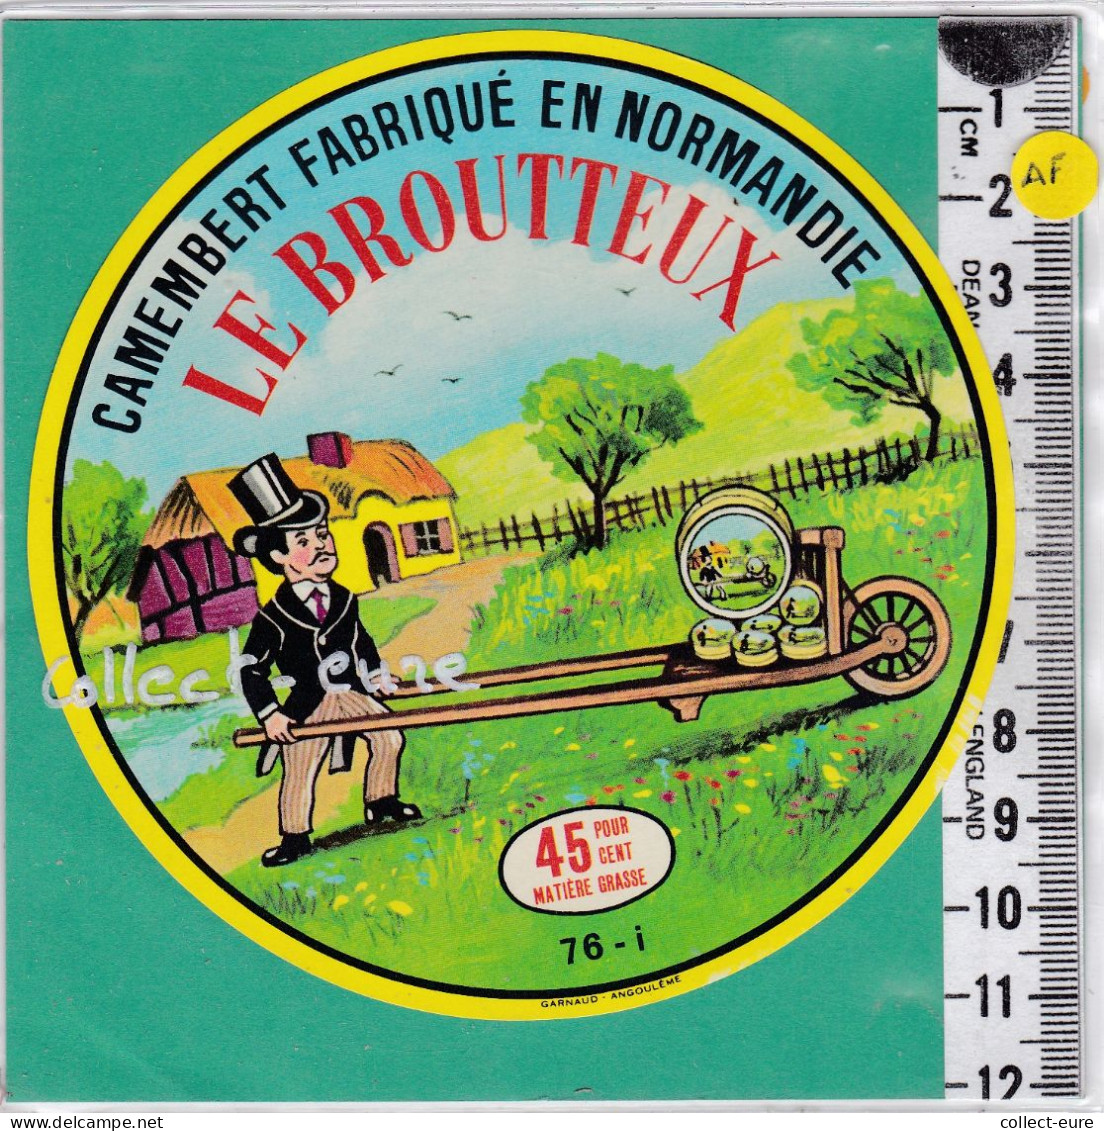 C1360 FROMAGE CAMEMBERT LE BROUTTEUX MOULINEAUX SEINE MARITIME BROUETTE - Fromage